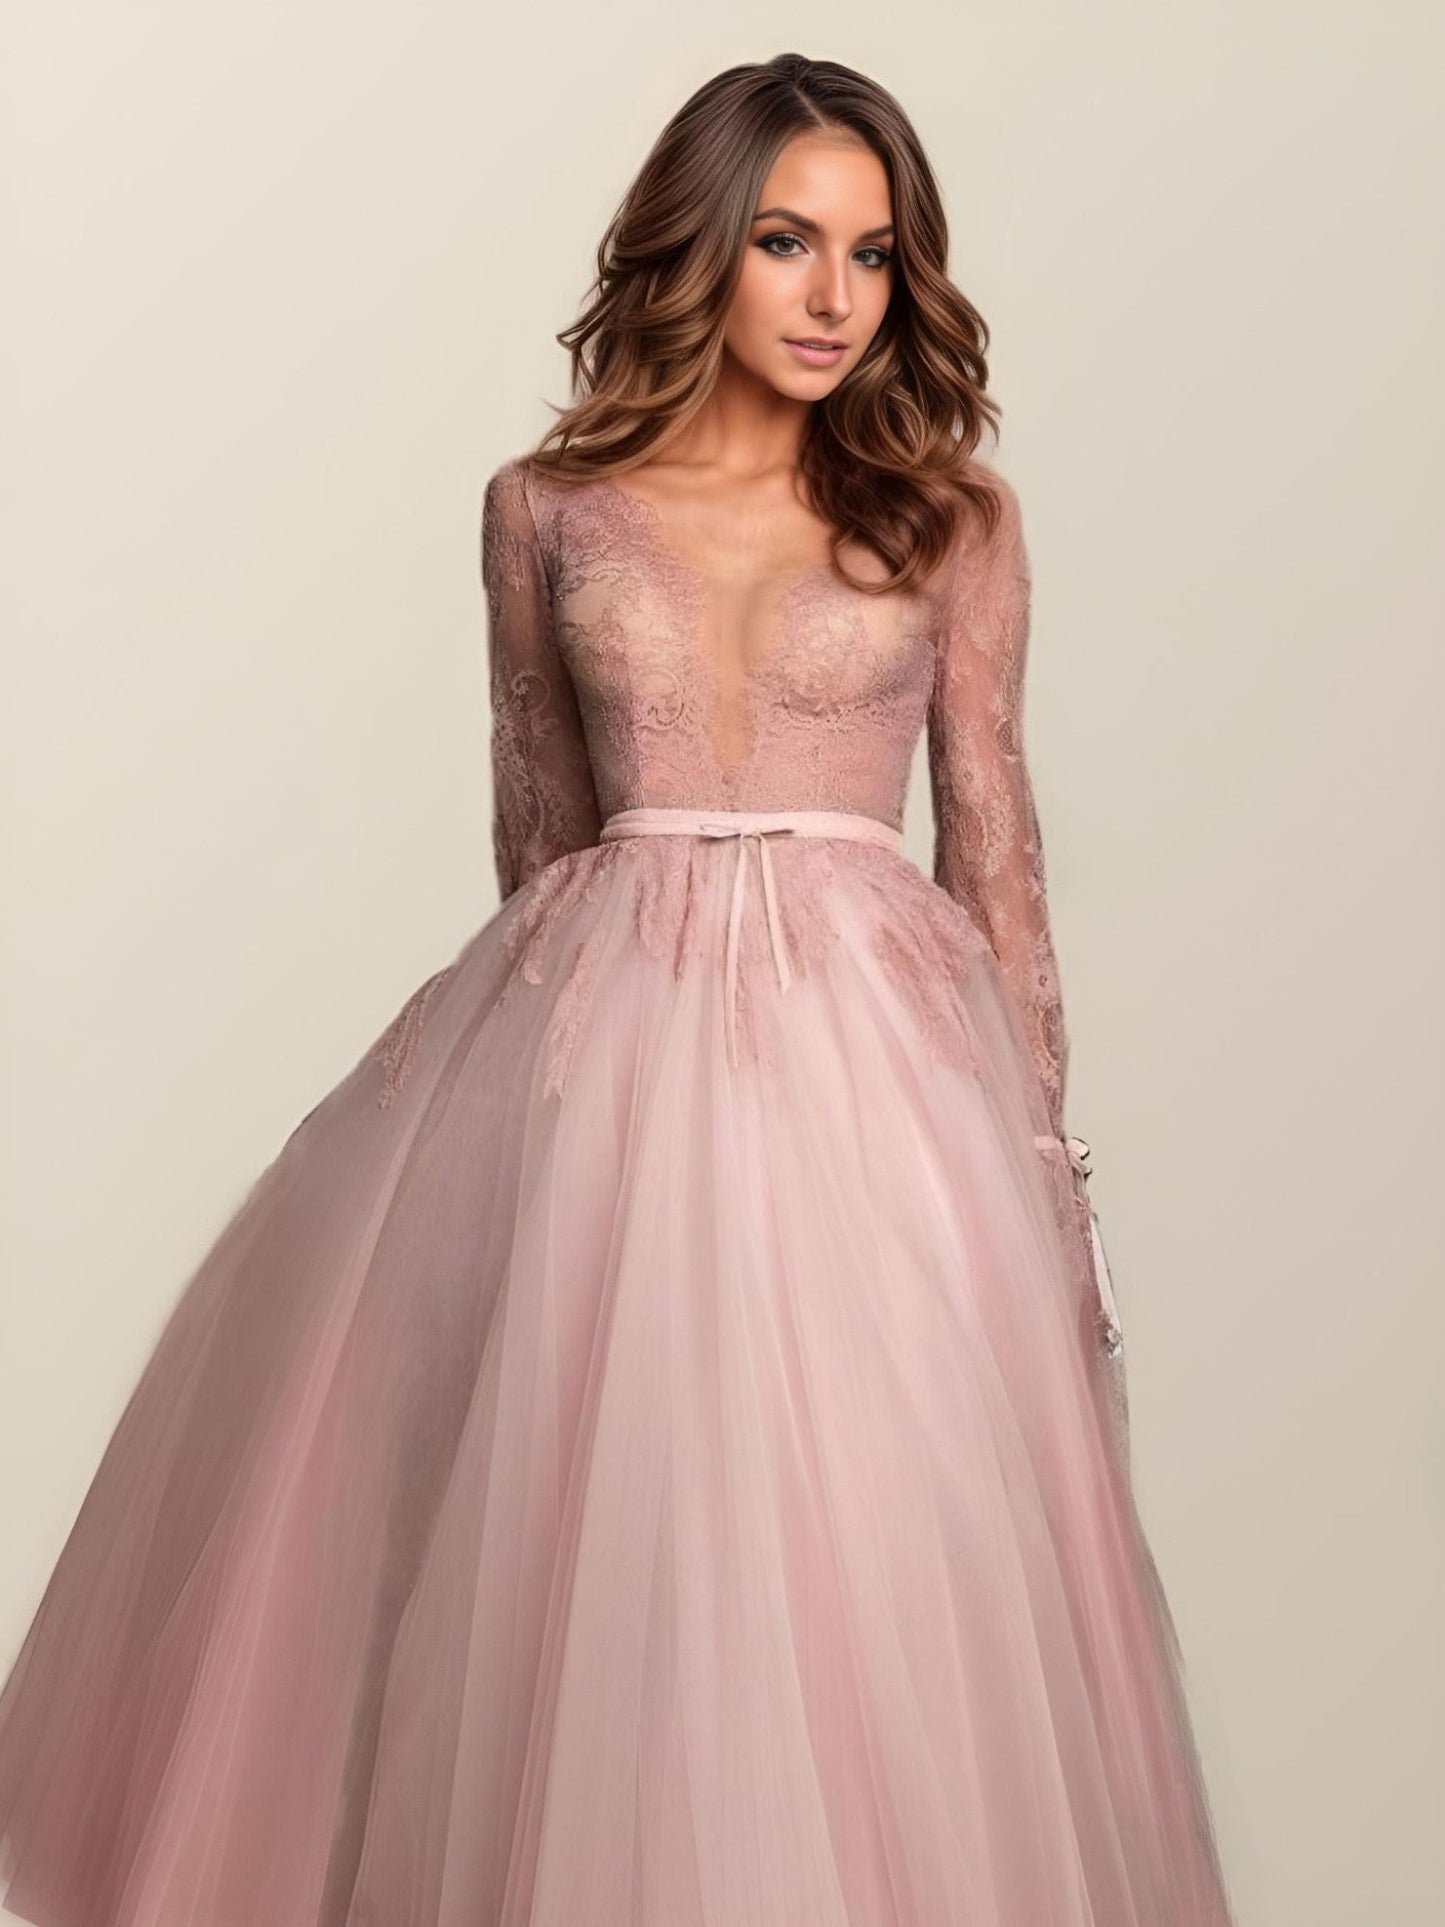 MIKAELA Formal Couture Dress